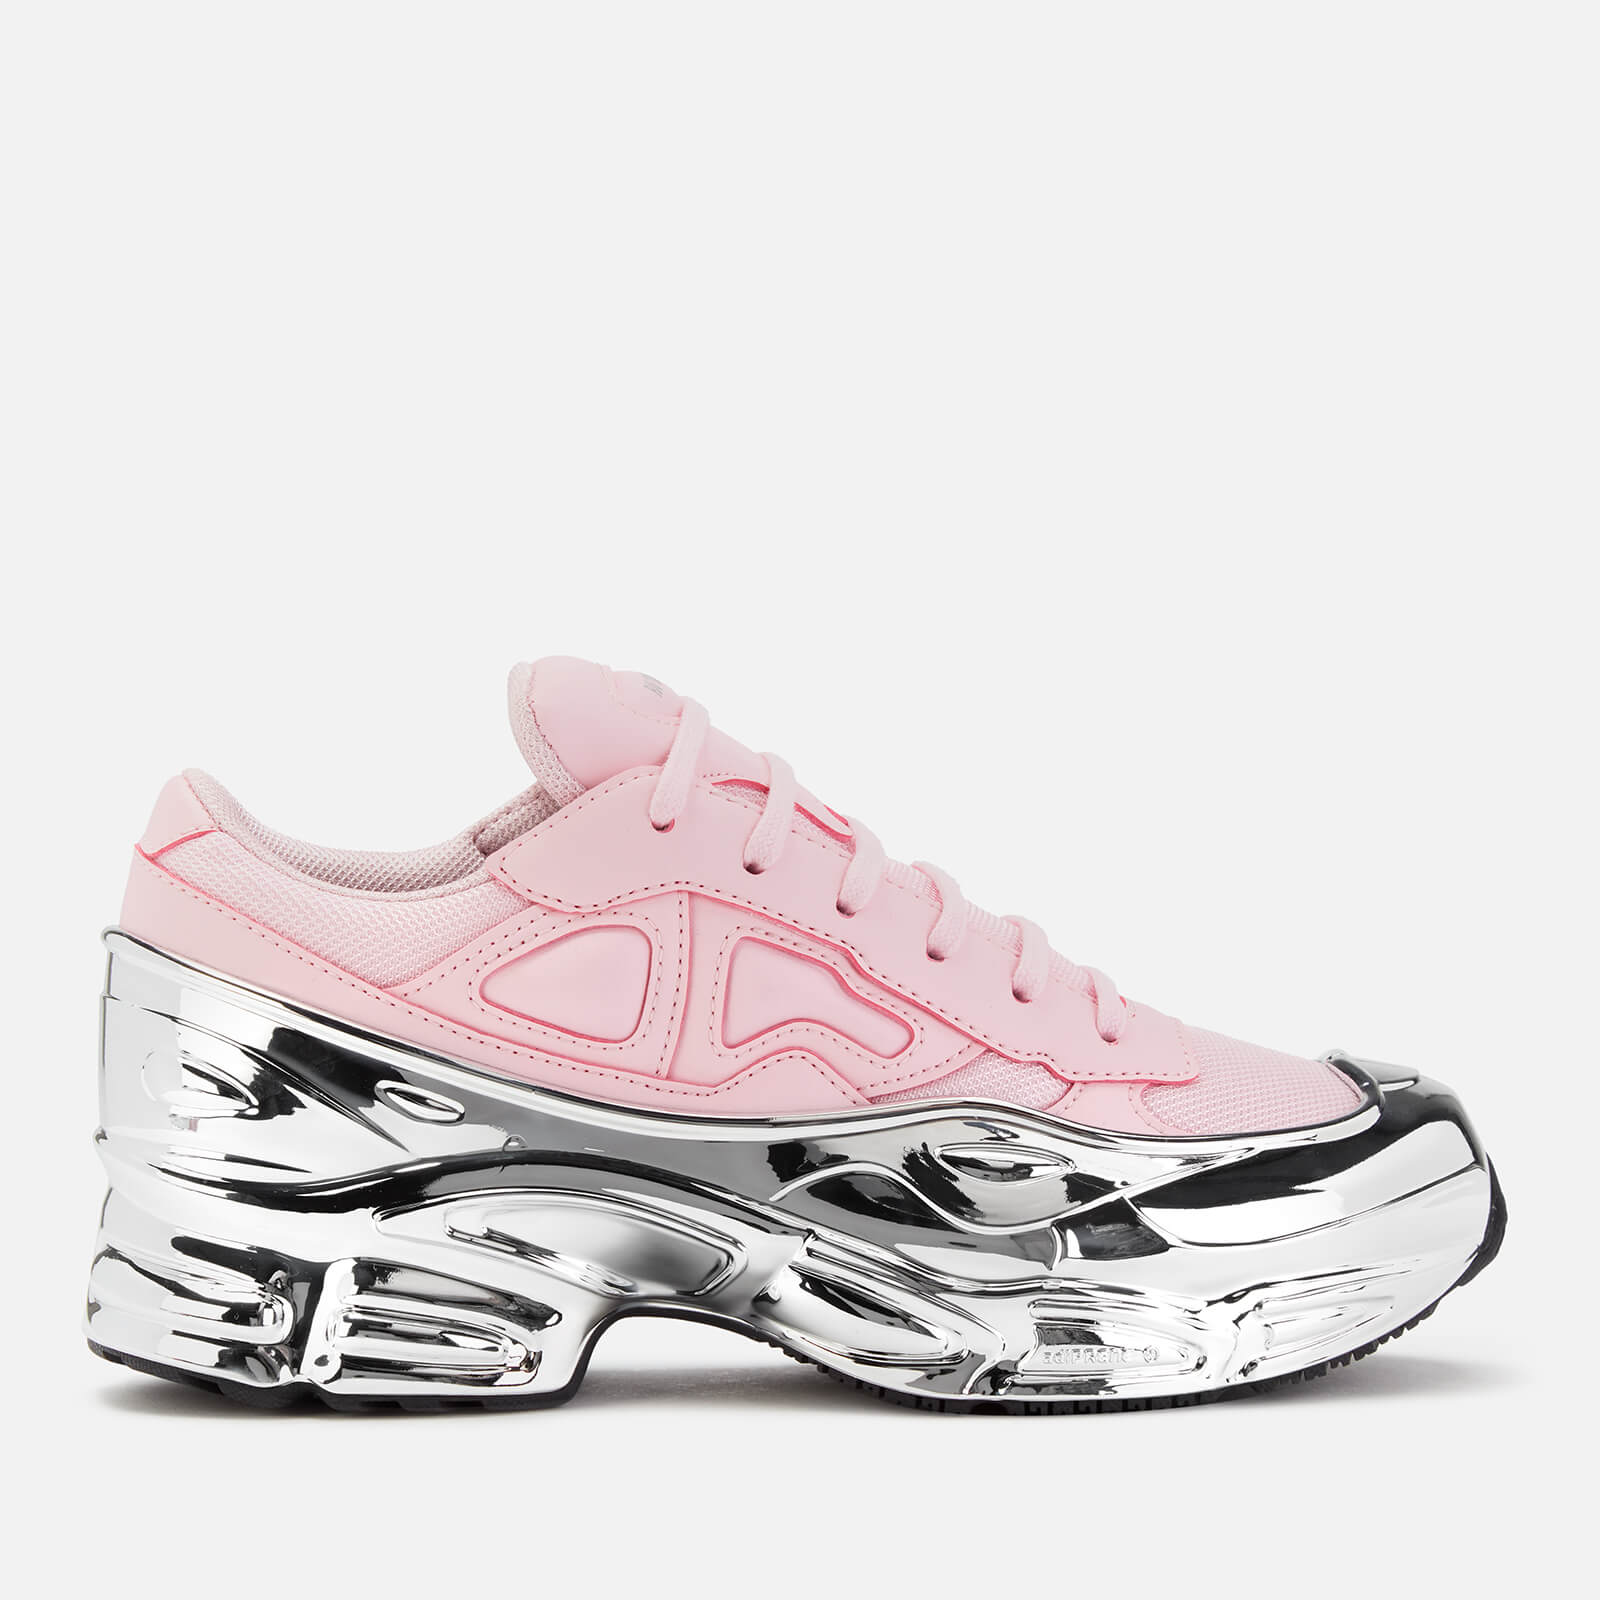 Ozweego Trainers - CL Pink/Silver 